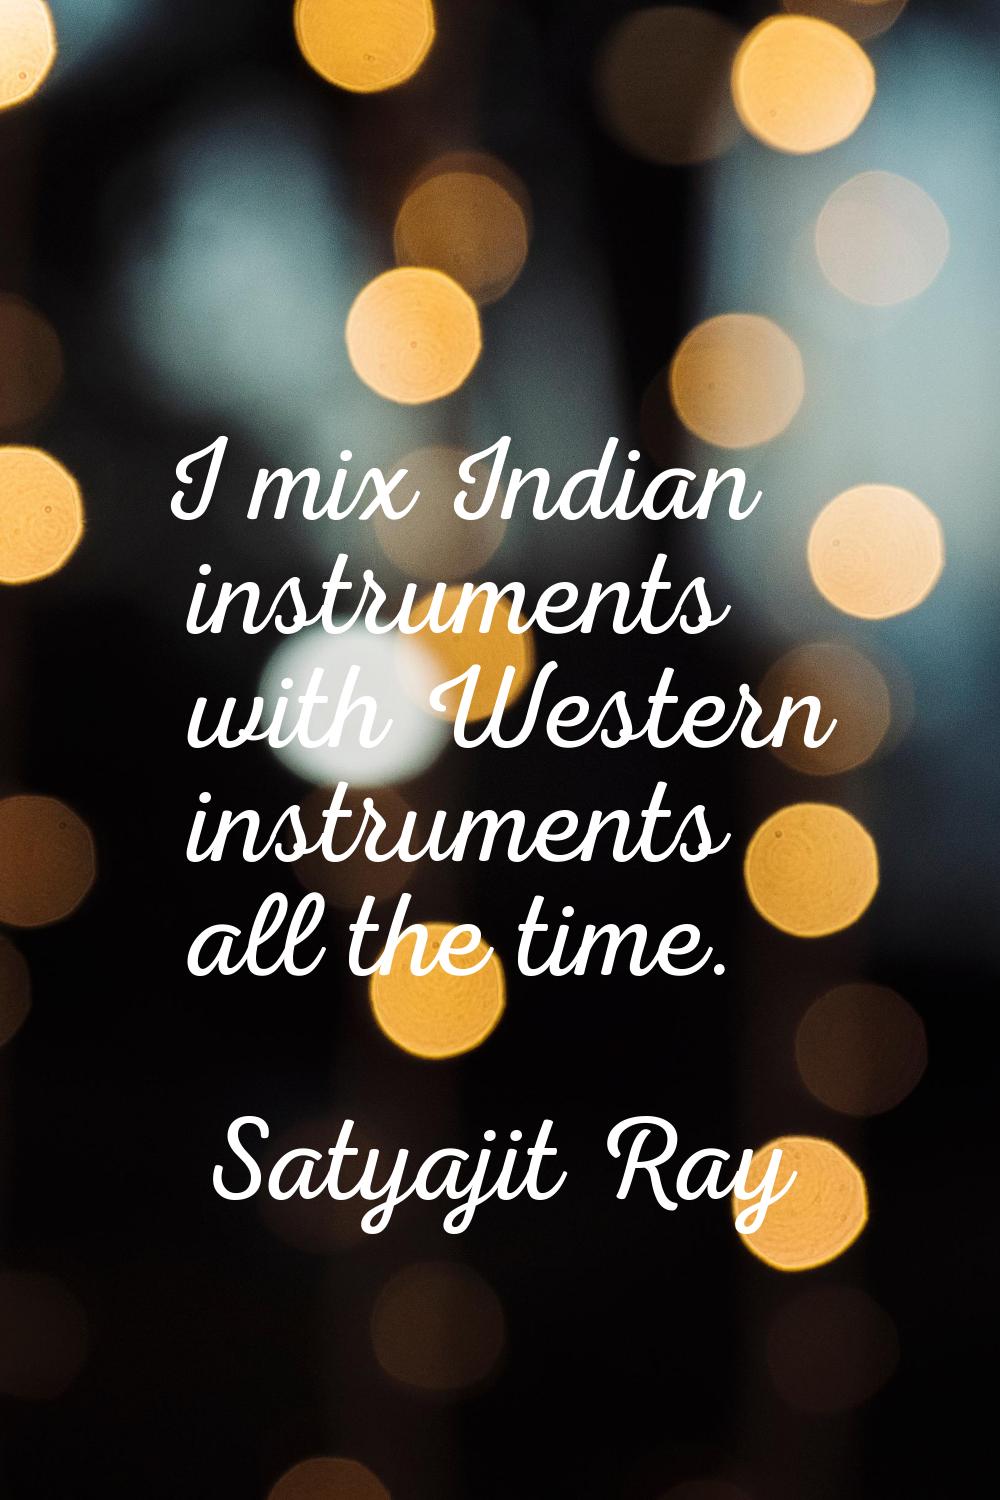 I mix Indian instruments with Western instruments all the time.